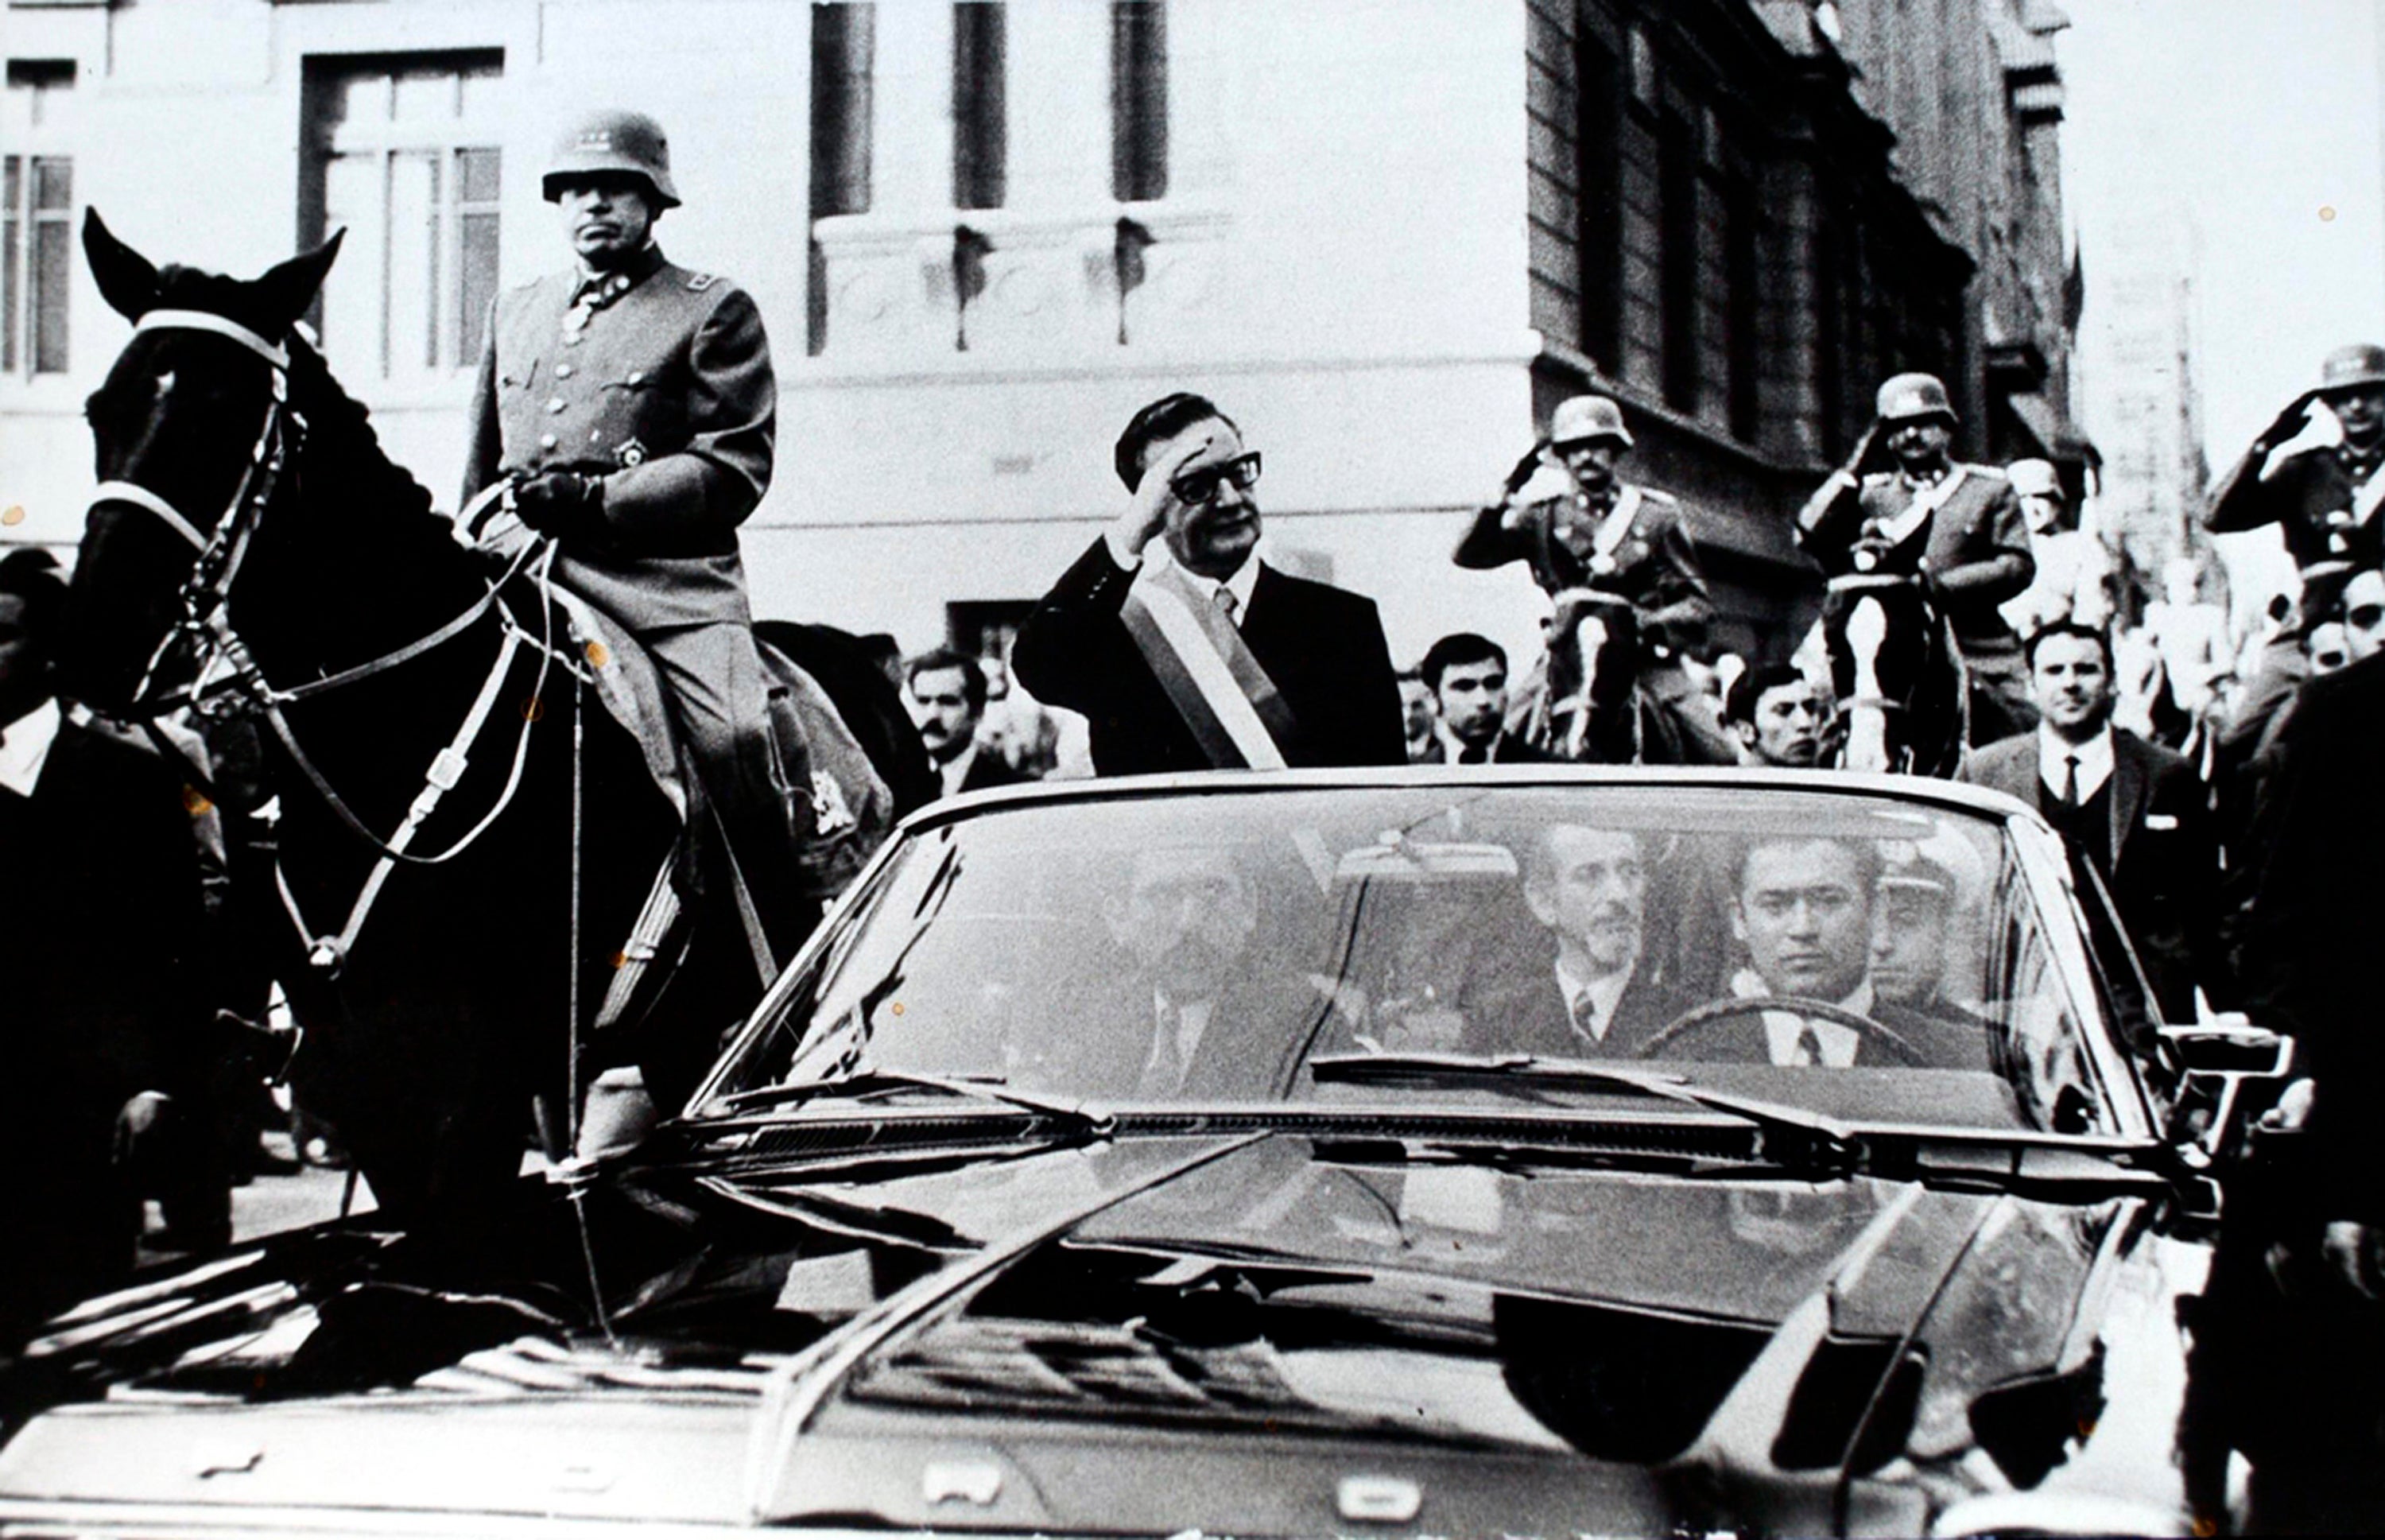 Chilean President Salvador Allende salutes from an open vehicle as General Augusto Pinochet rides on horseback alongside him in Santiago, in May 1972